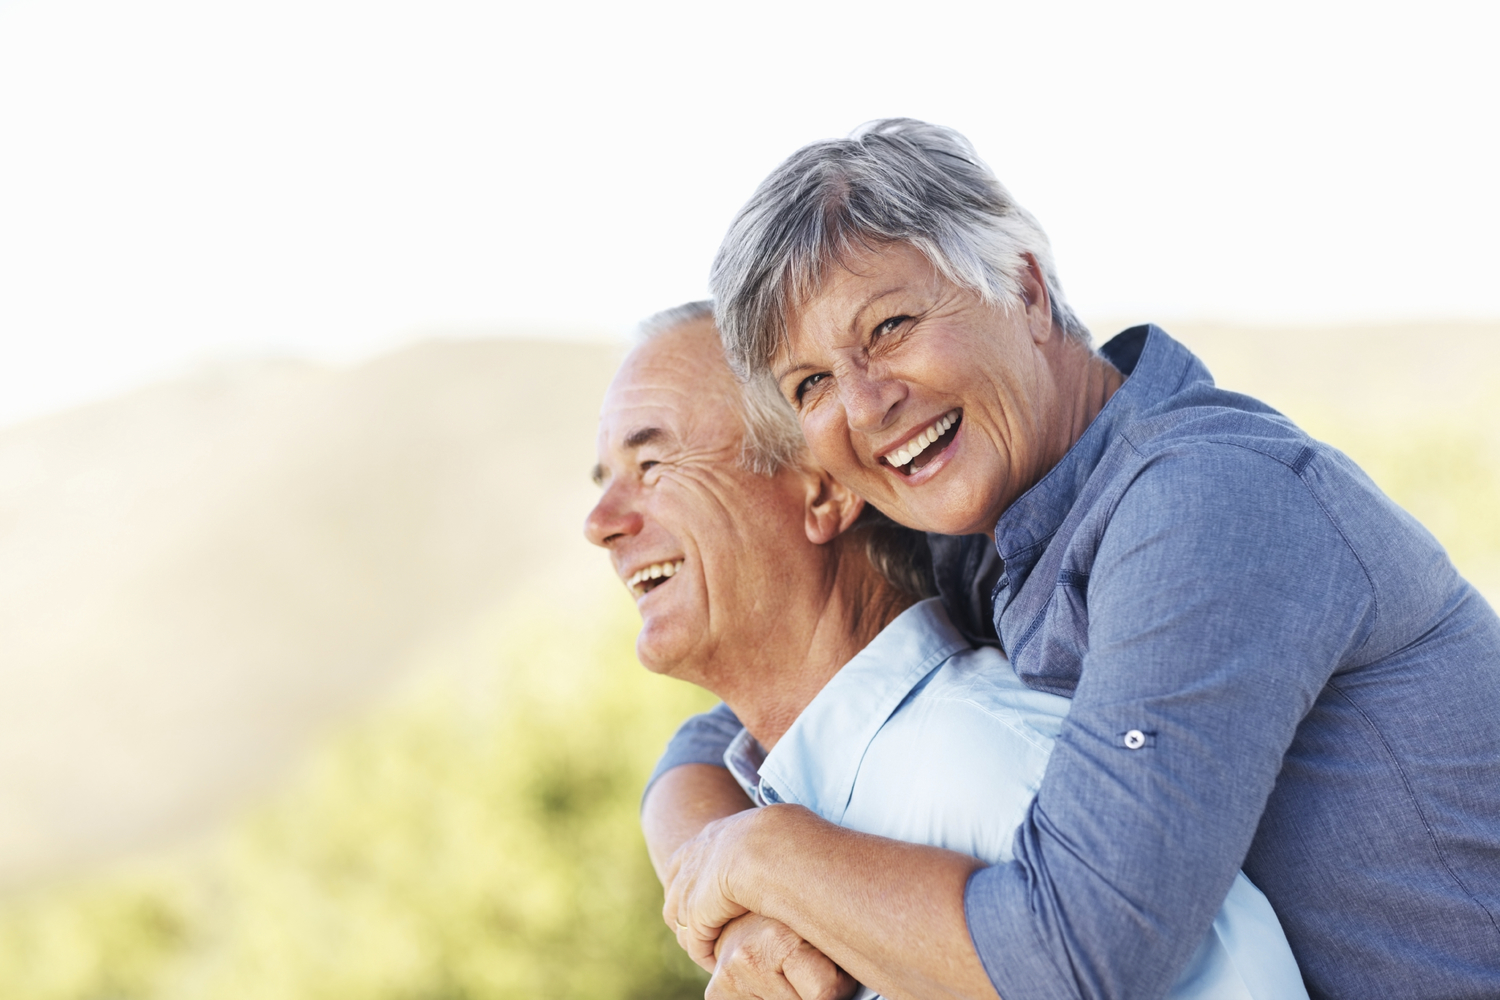 Portrait of cheerful mature woman smiling while embracing man outdoors